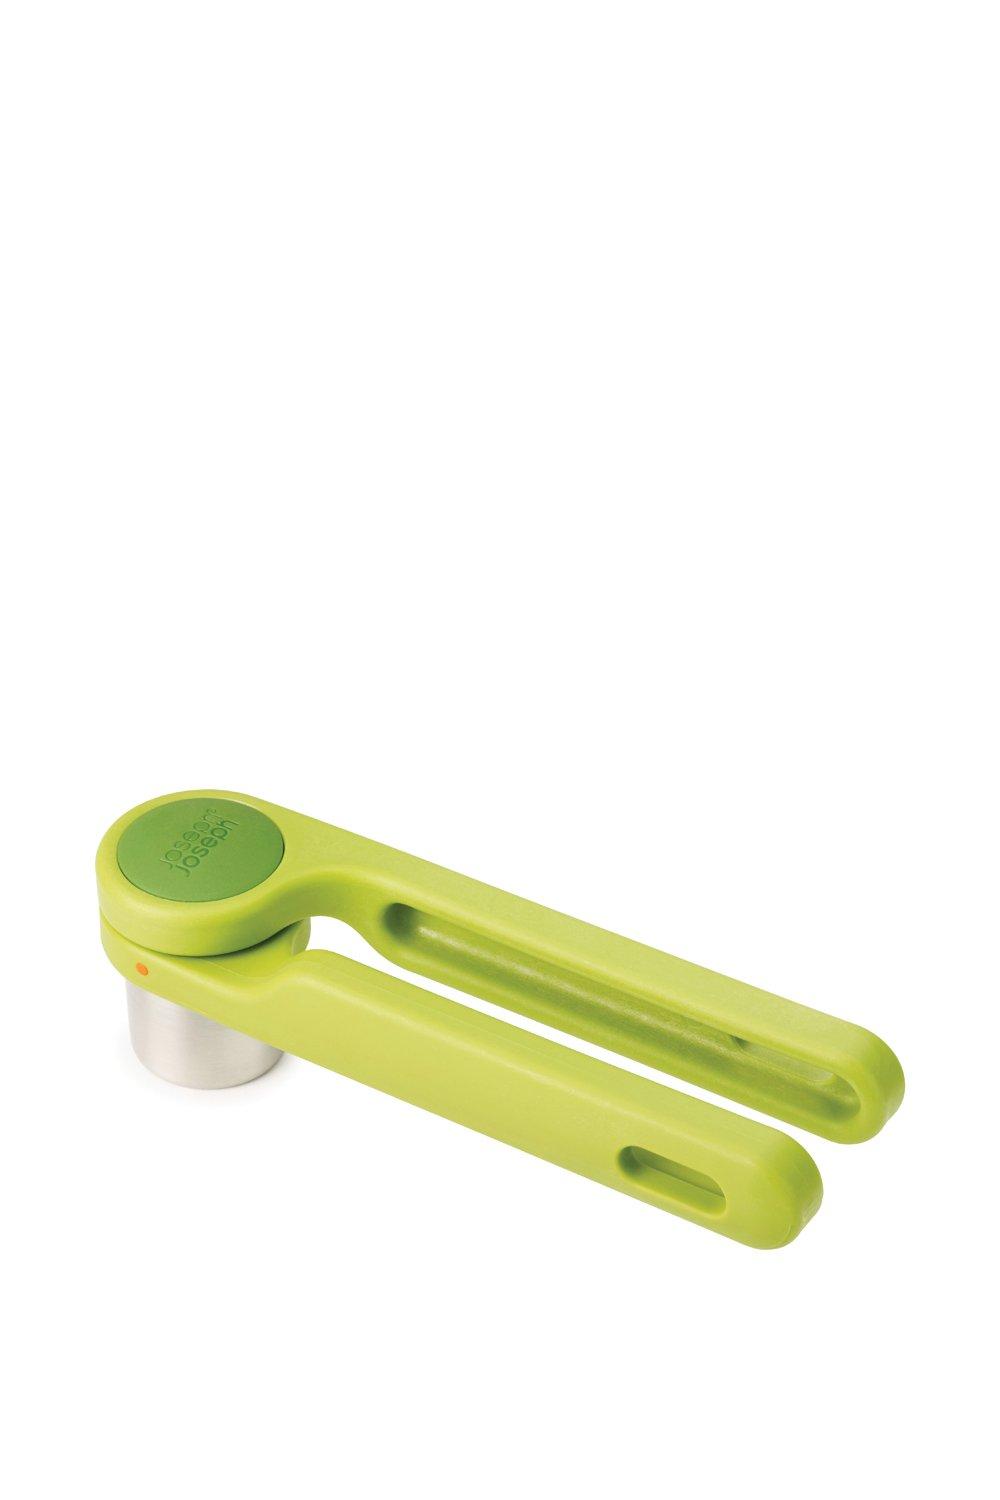 Picture of Helix Garlic Press